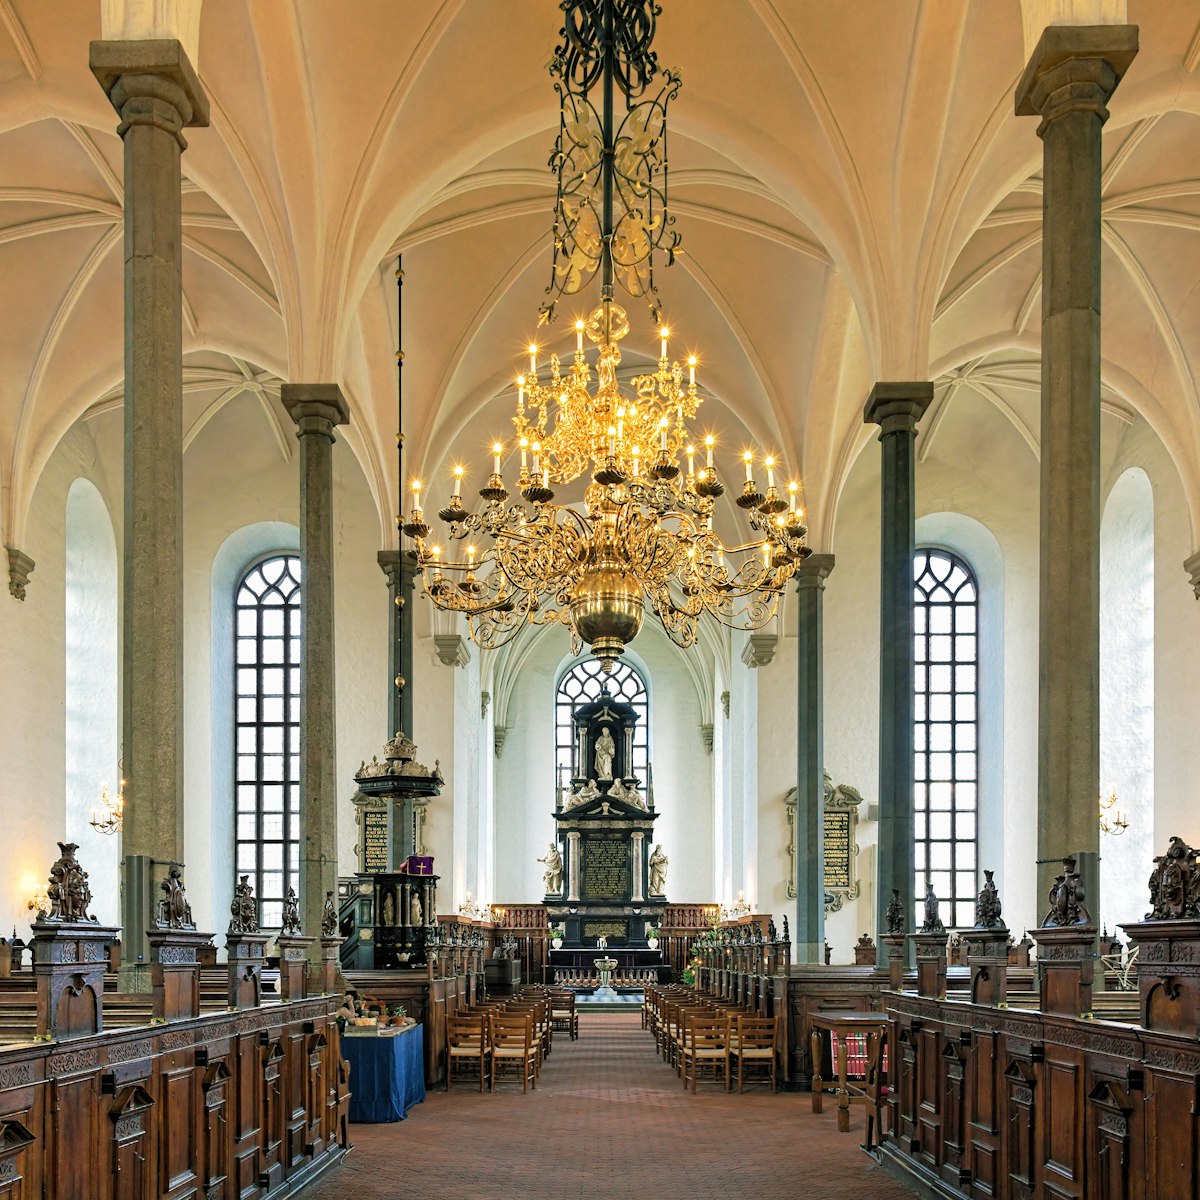 Interior of the Church of Holy Trinity. The church was built in 1617-1628 by design of the Flemish-Danish architect Lorenz van Steenwinckel.